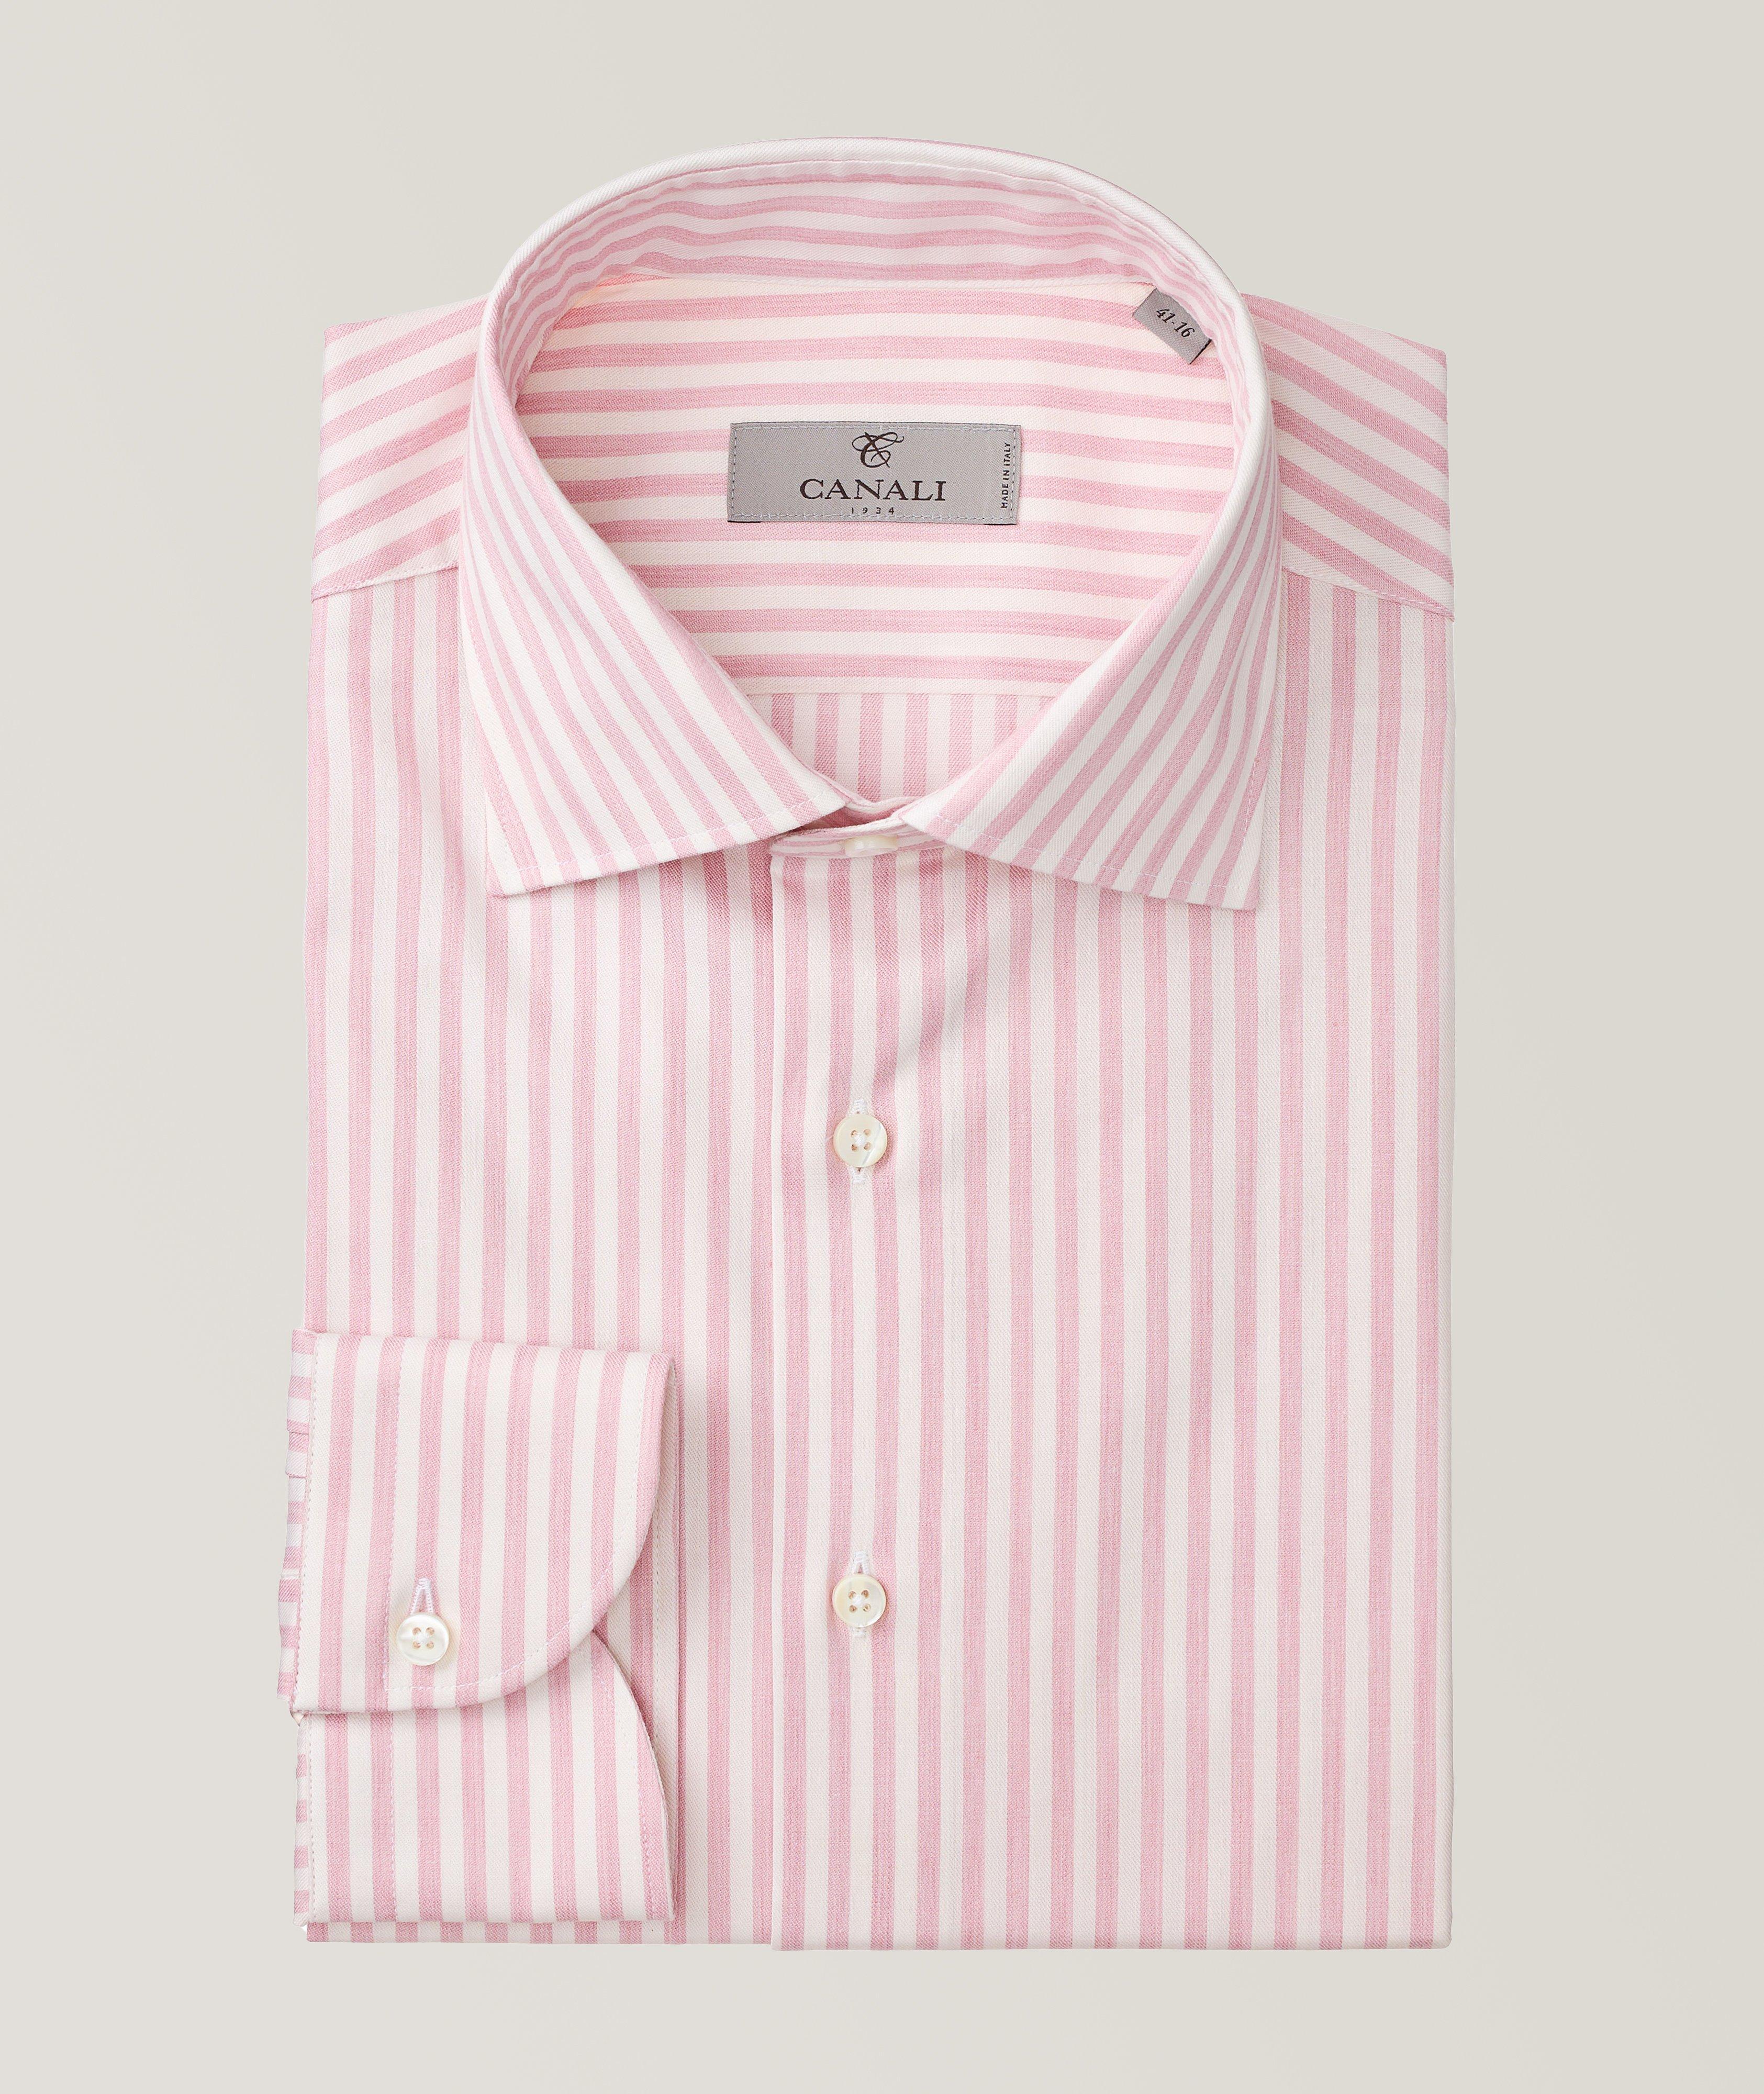 Contemporary Fit Cotton-Blend Striped Shirt image 0